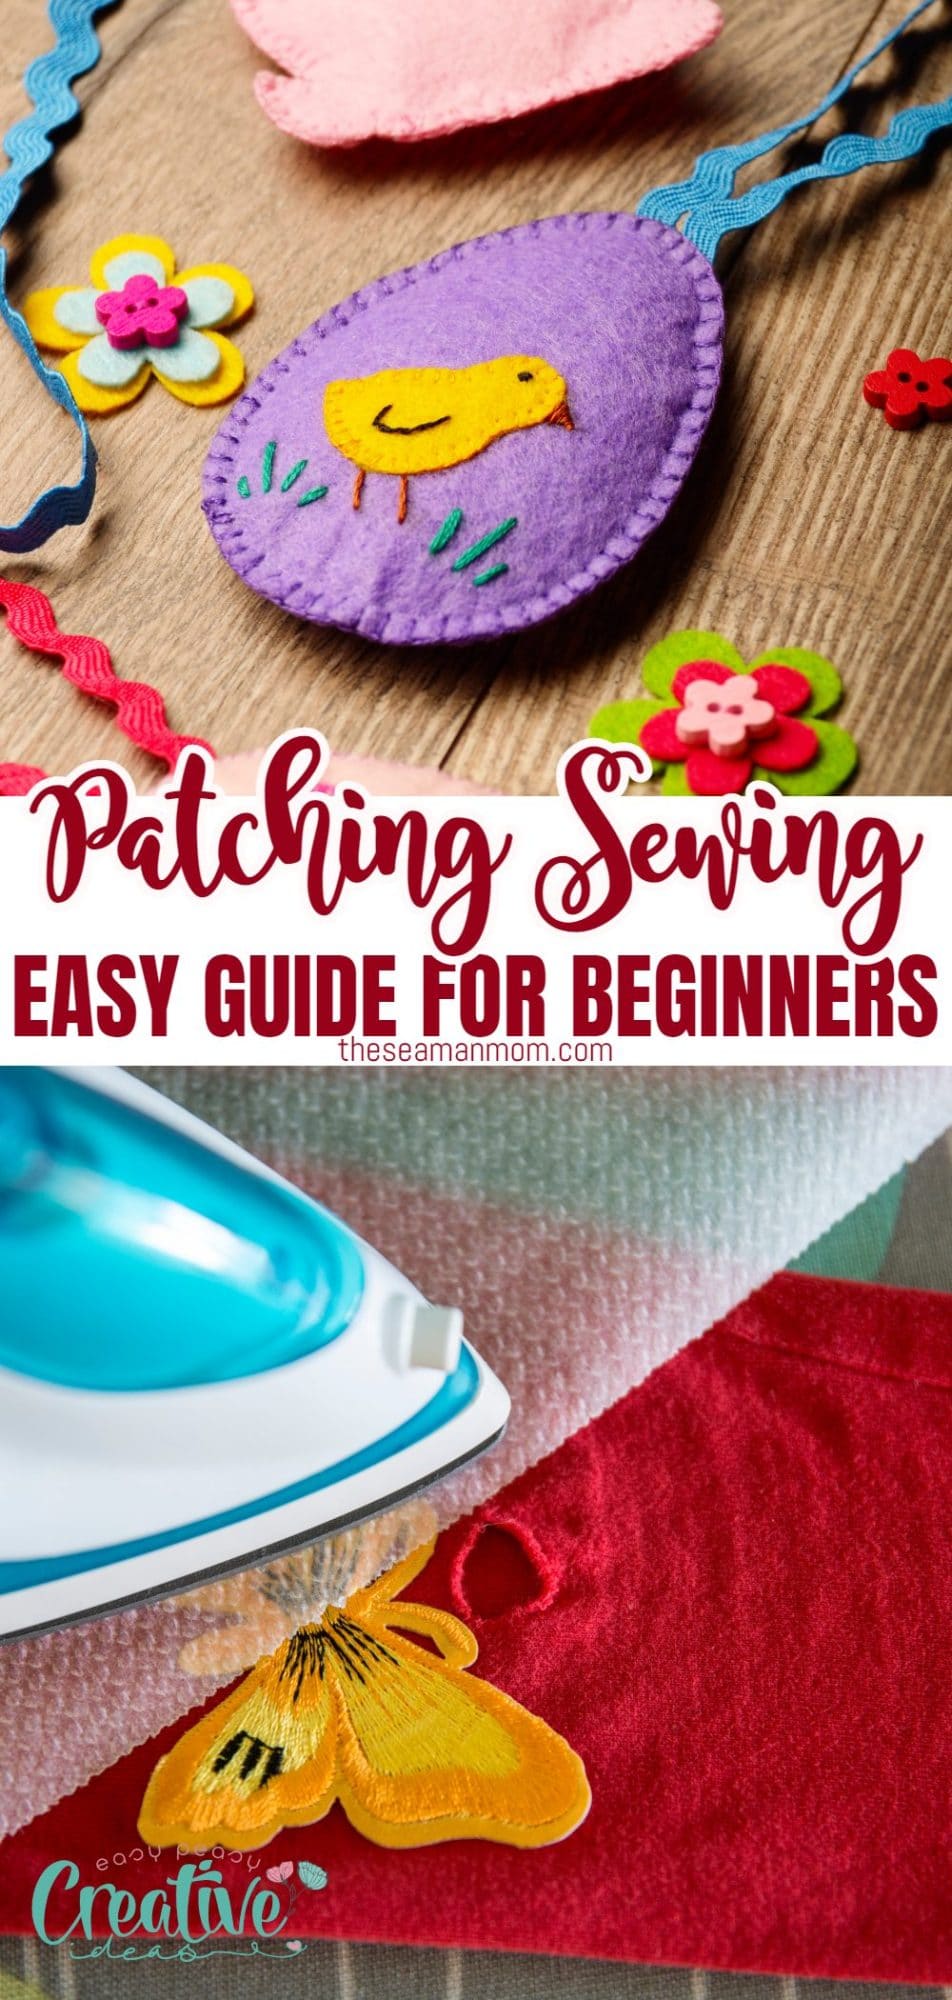 Photo collage of different types of patches illustrated in a patching sewing guide for beginners